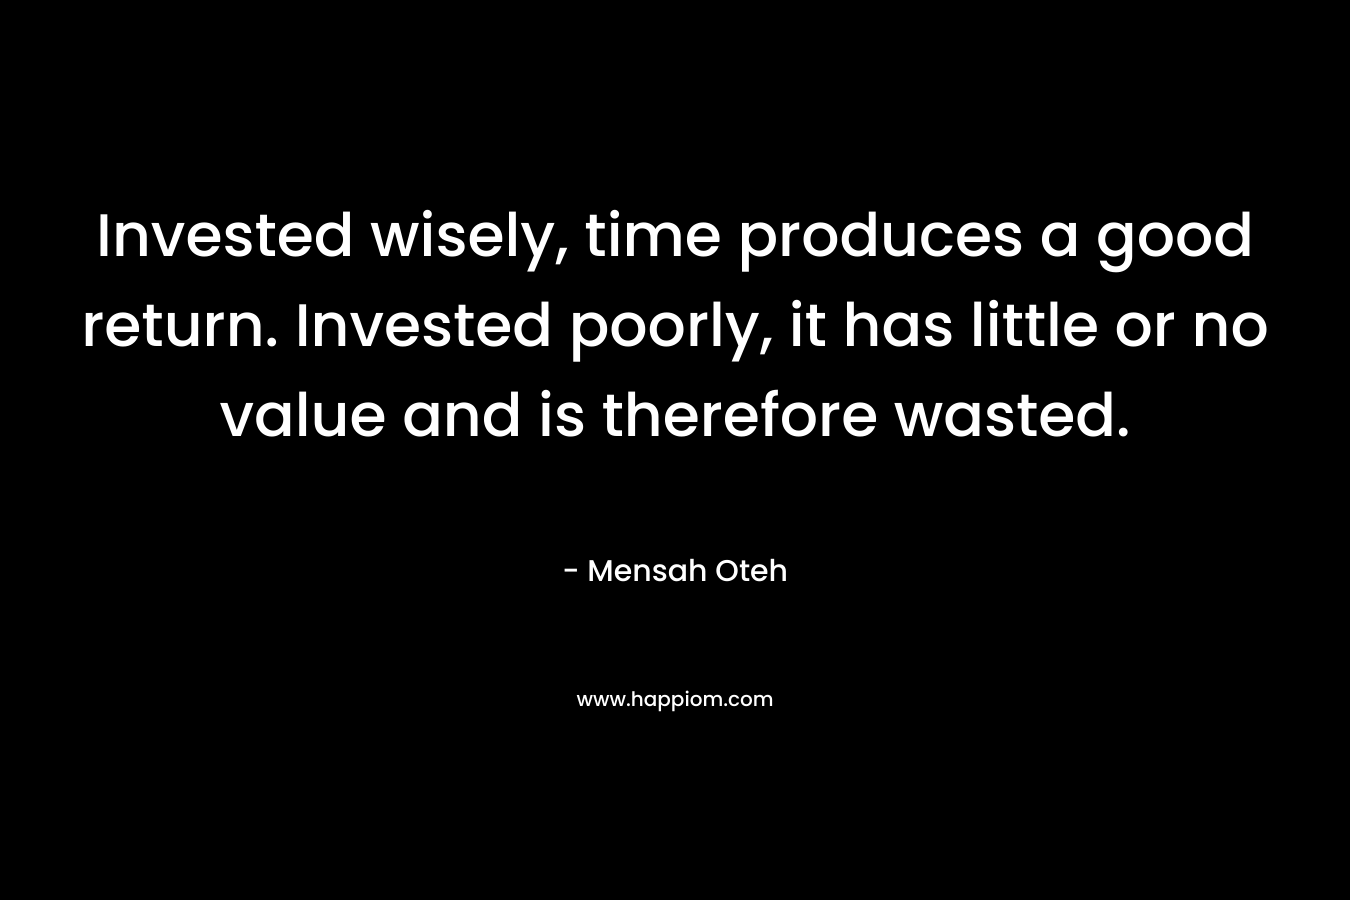 Invested wisely, time produces a good return. Invested poorly, it has little or no value and is therefore wasted.